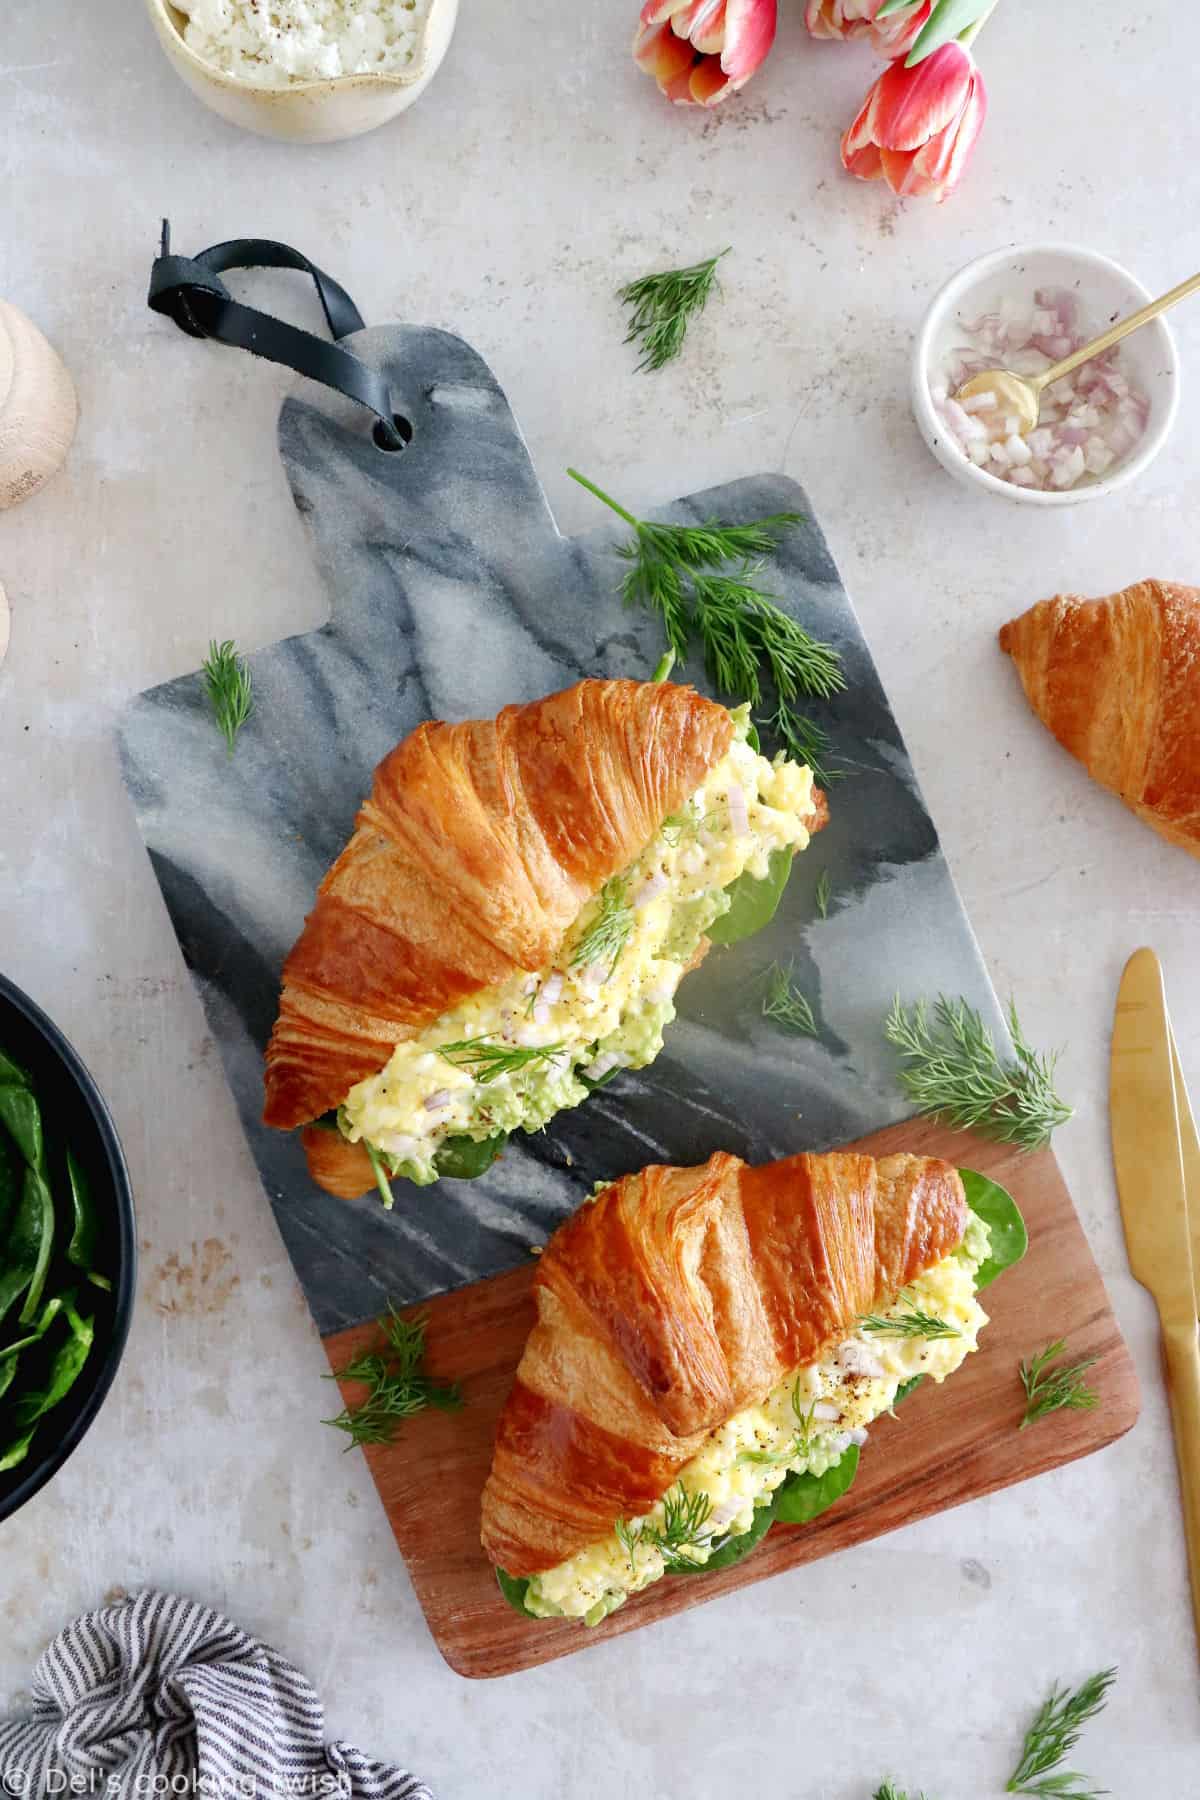 Scrambled egg croissant breakfast sandwiches are filled with avocado, goat cheese scrambled eggs and baby spinach. A great lazy breakfast.